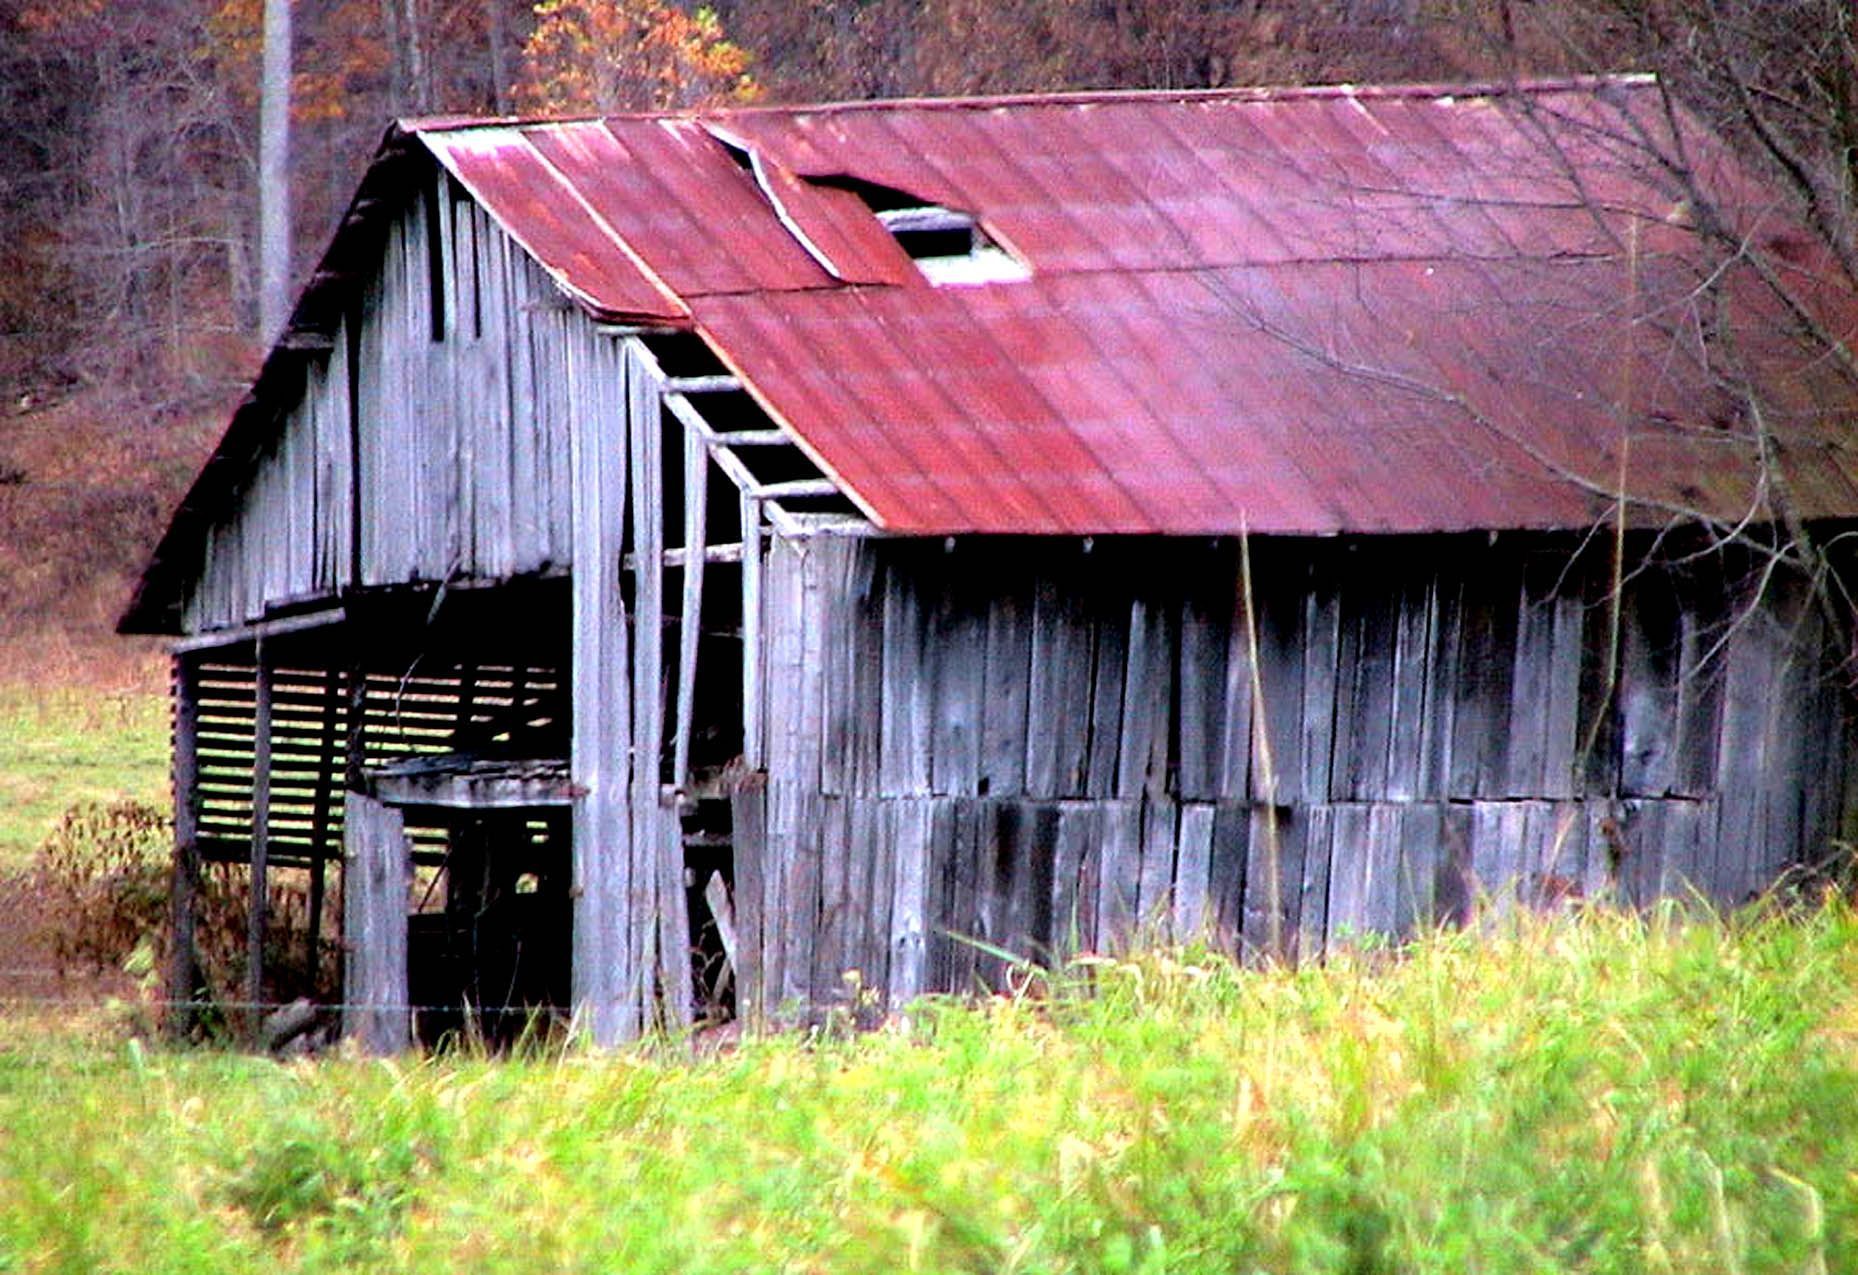 Free picture: abandoned, horse, barn, autumn, fall